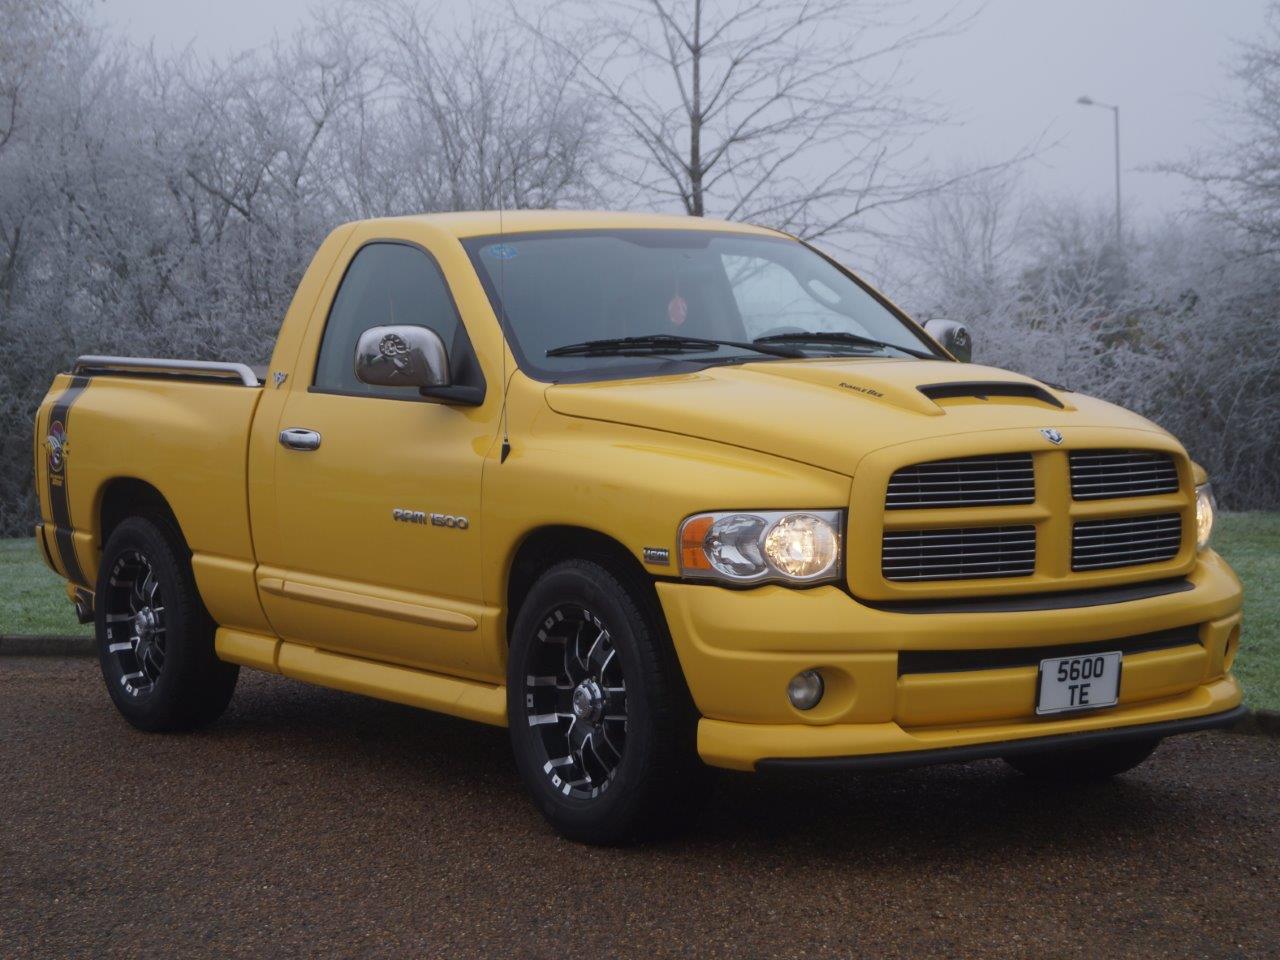 2004 Ram 1500 Rumble Bee Truck in Mint Condition Is Hot and Affordable -  autoevolution